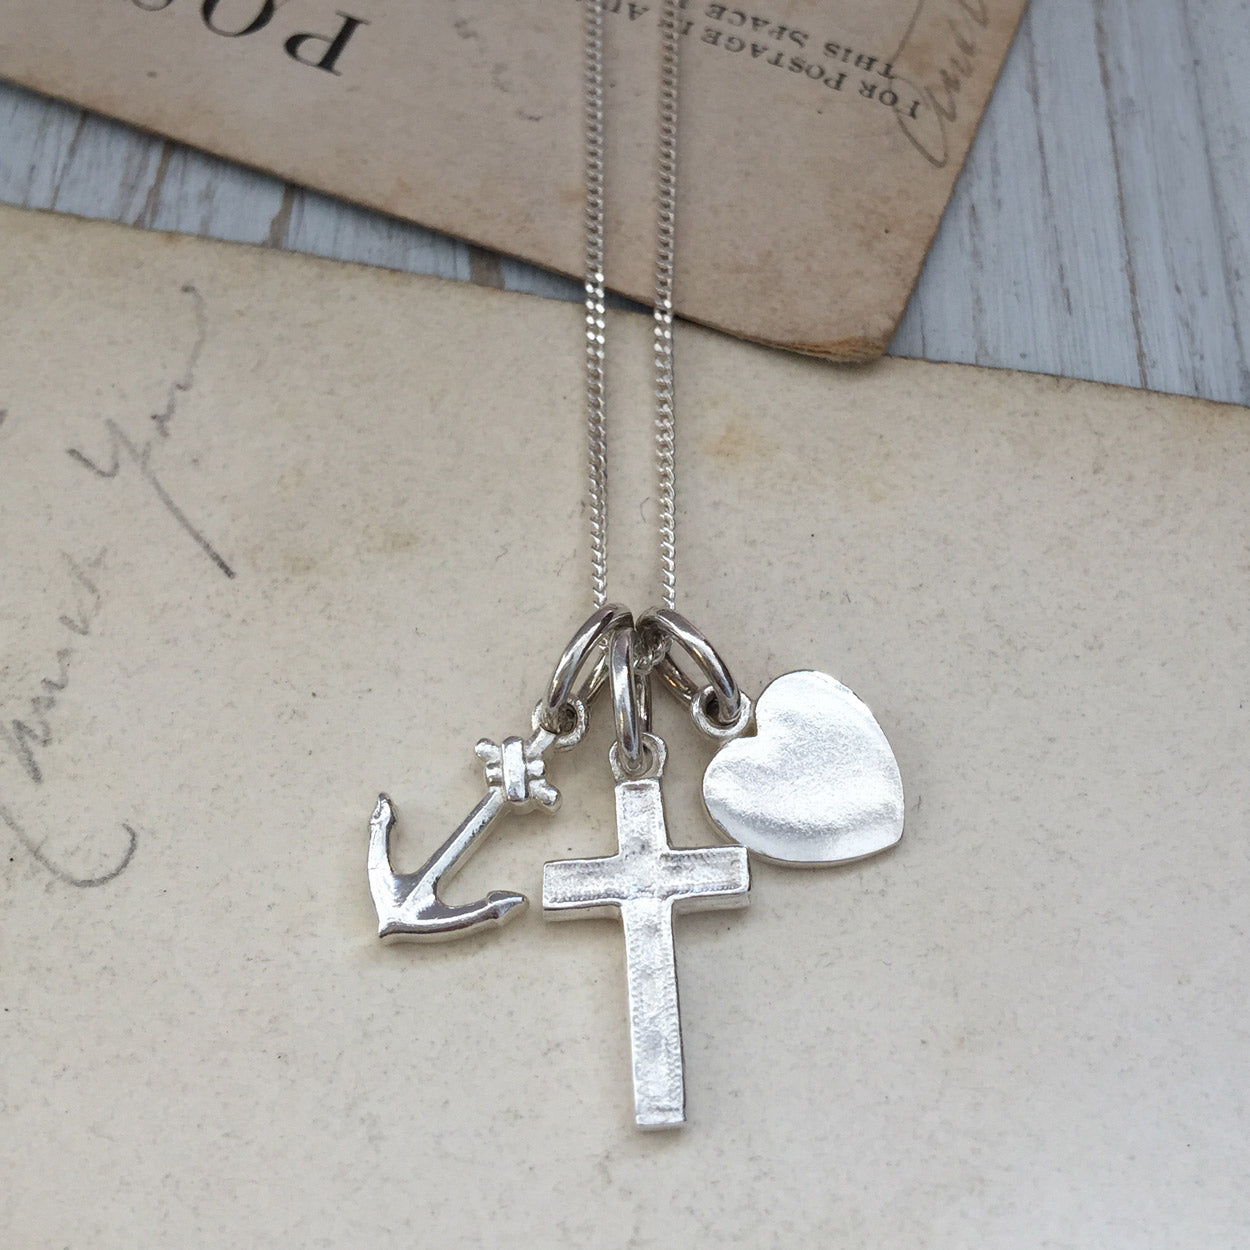 Bianca Jones Jewellery handcrafted Faith, Hope, Charity Necklace in Sterling Silver or 18ct Gold Vermeil with Symbolic Charms